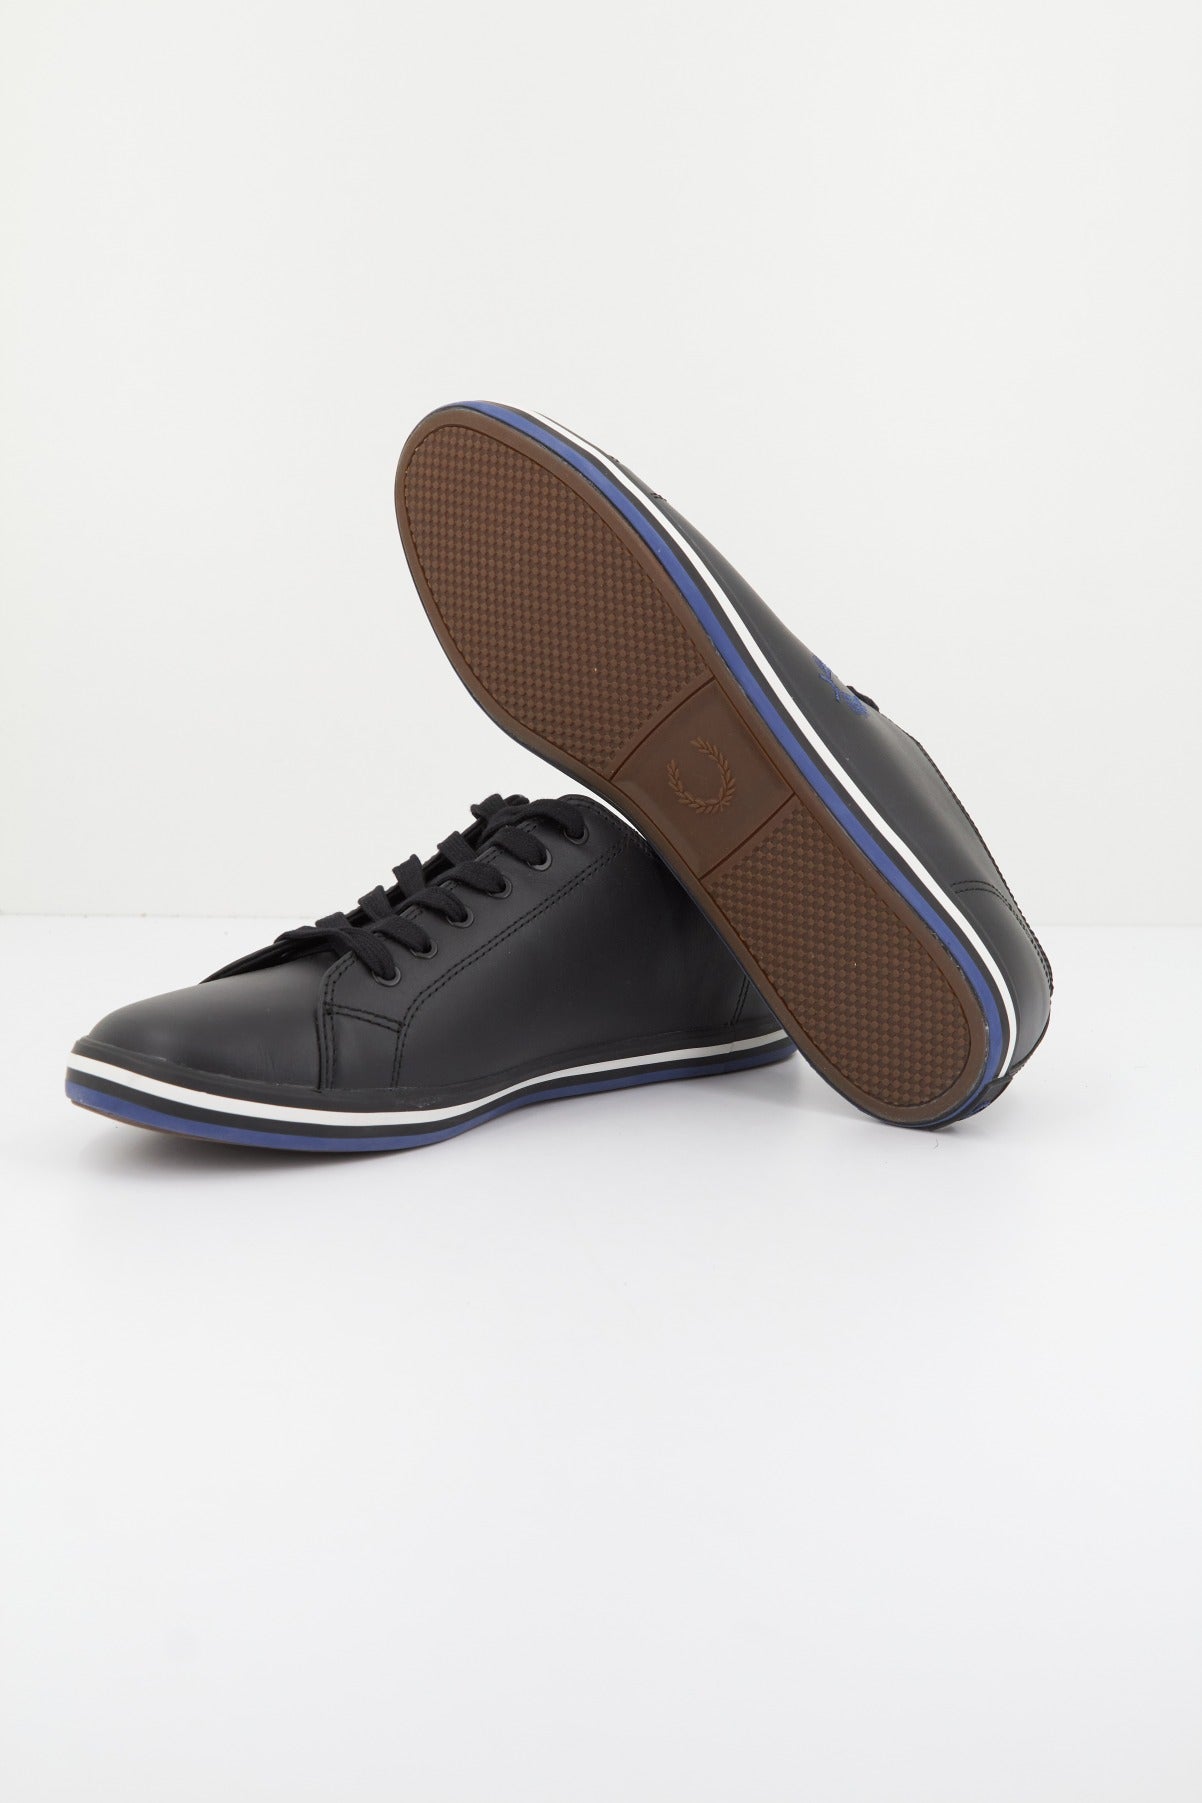 FRED PERRY KINGSTON LEATHER en color NEGRO  (4)